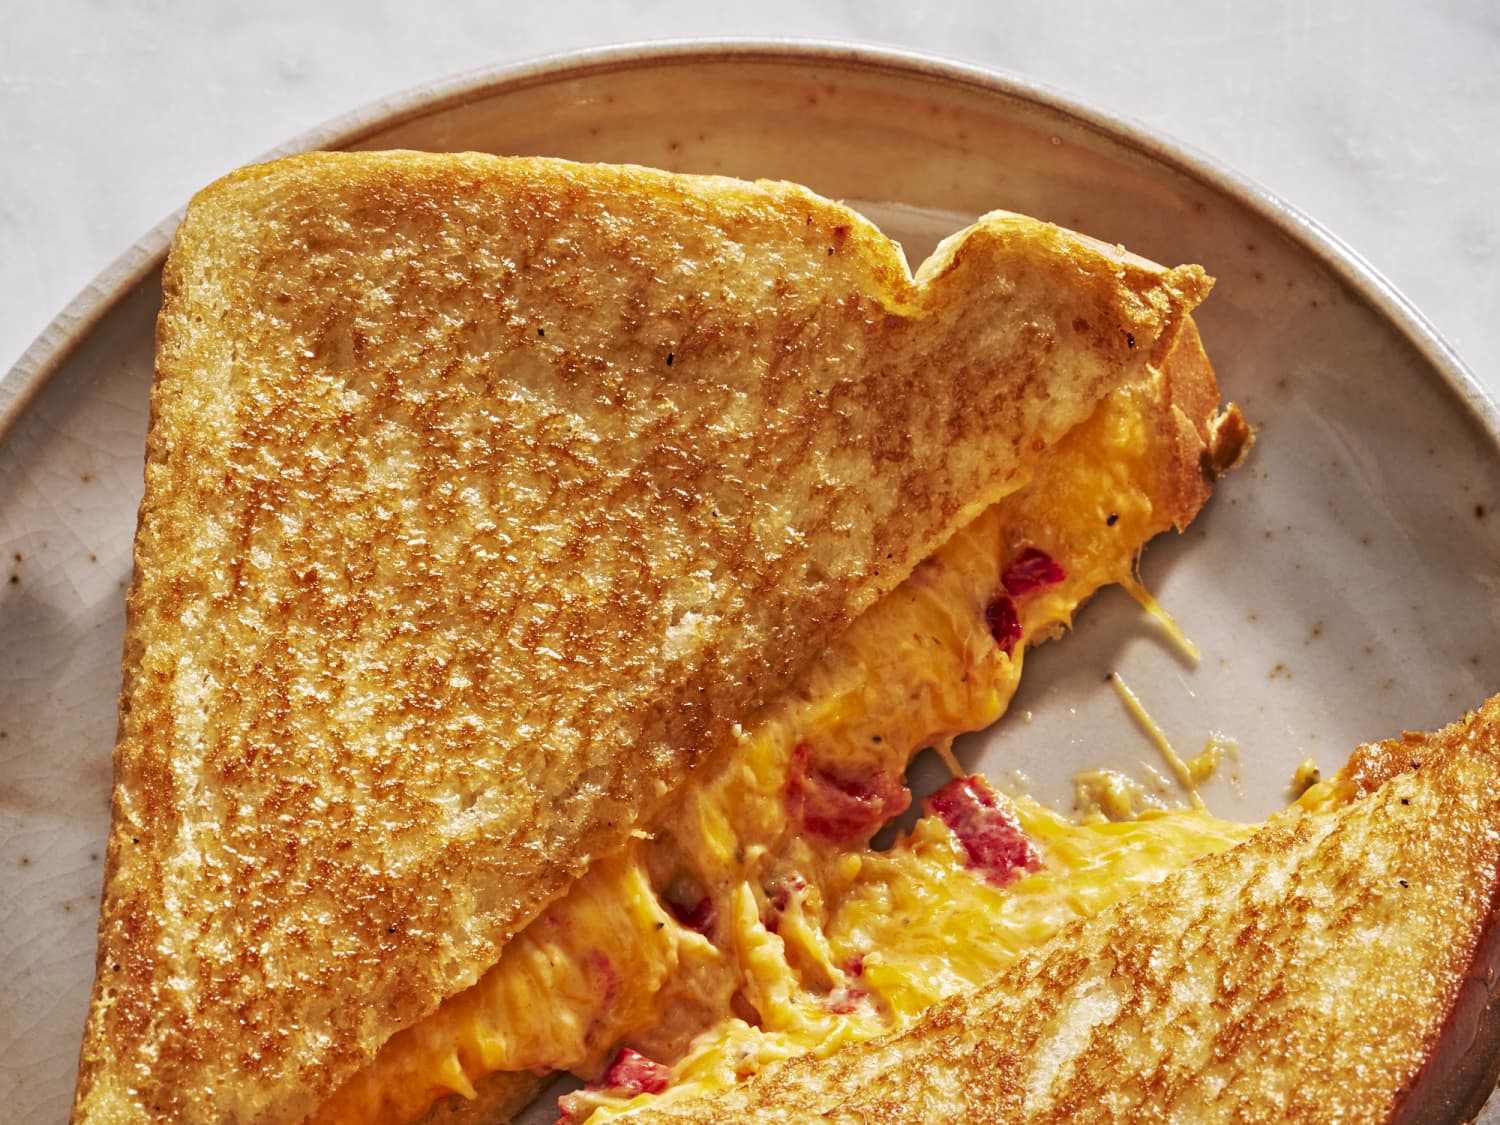 https://cdn.apartmenttherapy.info/image/upload/f_jpg,q_auto:eco,c_fill,g_auto,w_1500,ar_4:3/k%2FPhoto%2FRecipes%2F2023-03-pimento-grilled-cheese%2Fpimento-grilled-cheese_001